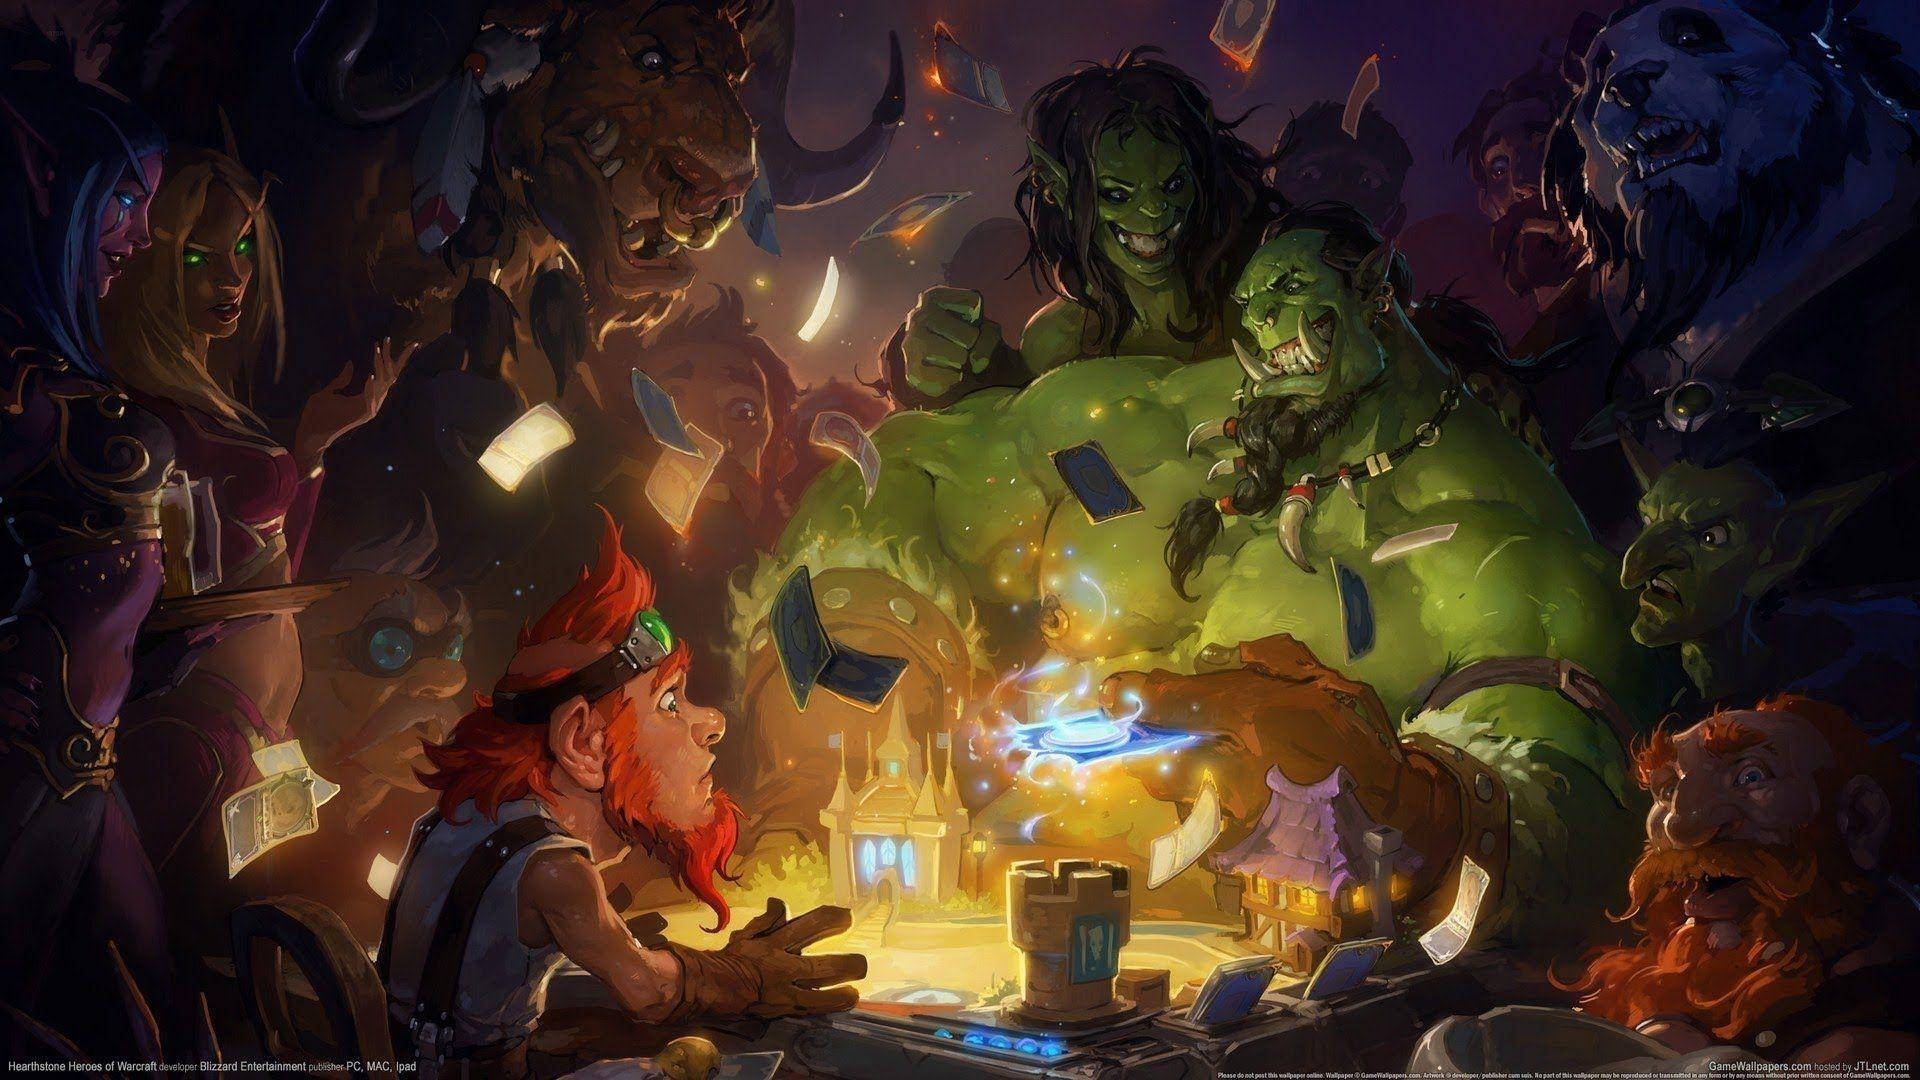 Dynamic Battle Scene from Hearthstone: Heroes of Warcraft Game in 2560 x 1440 resolution Wallpaper